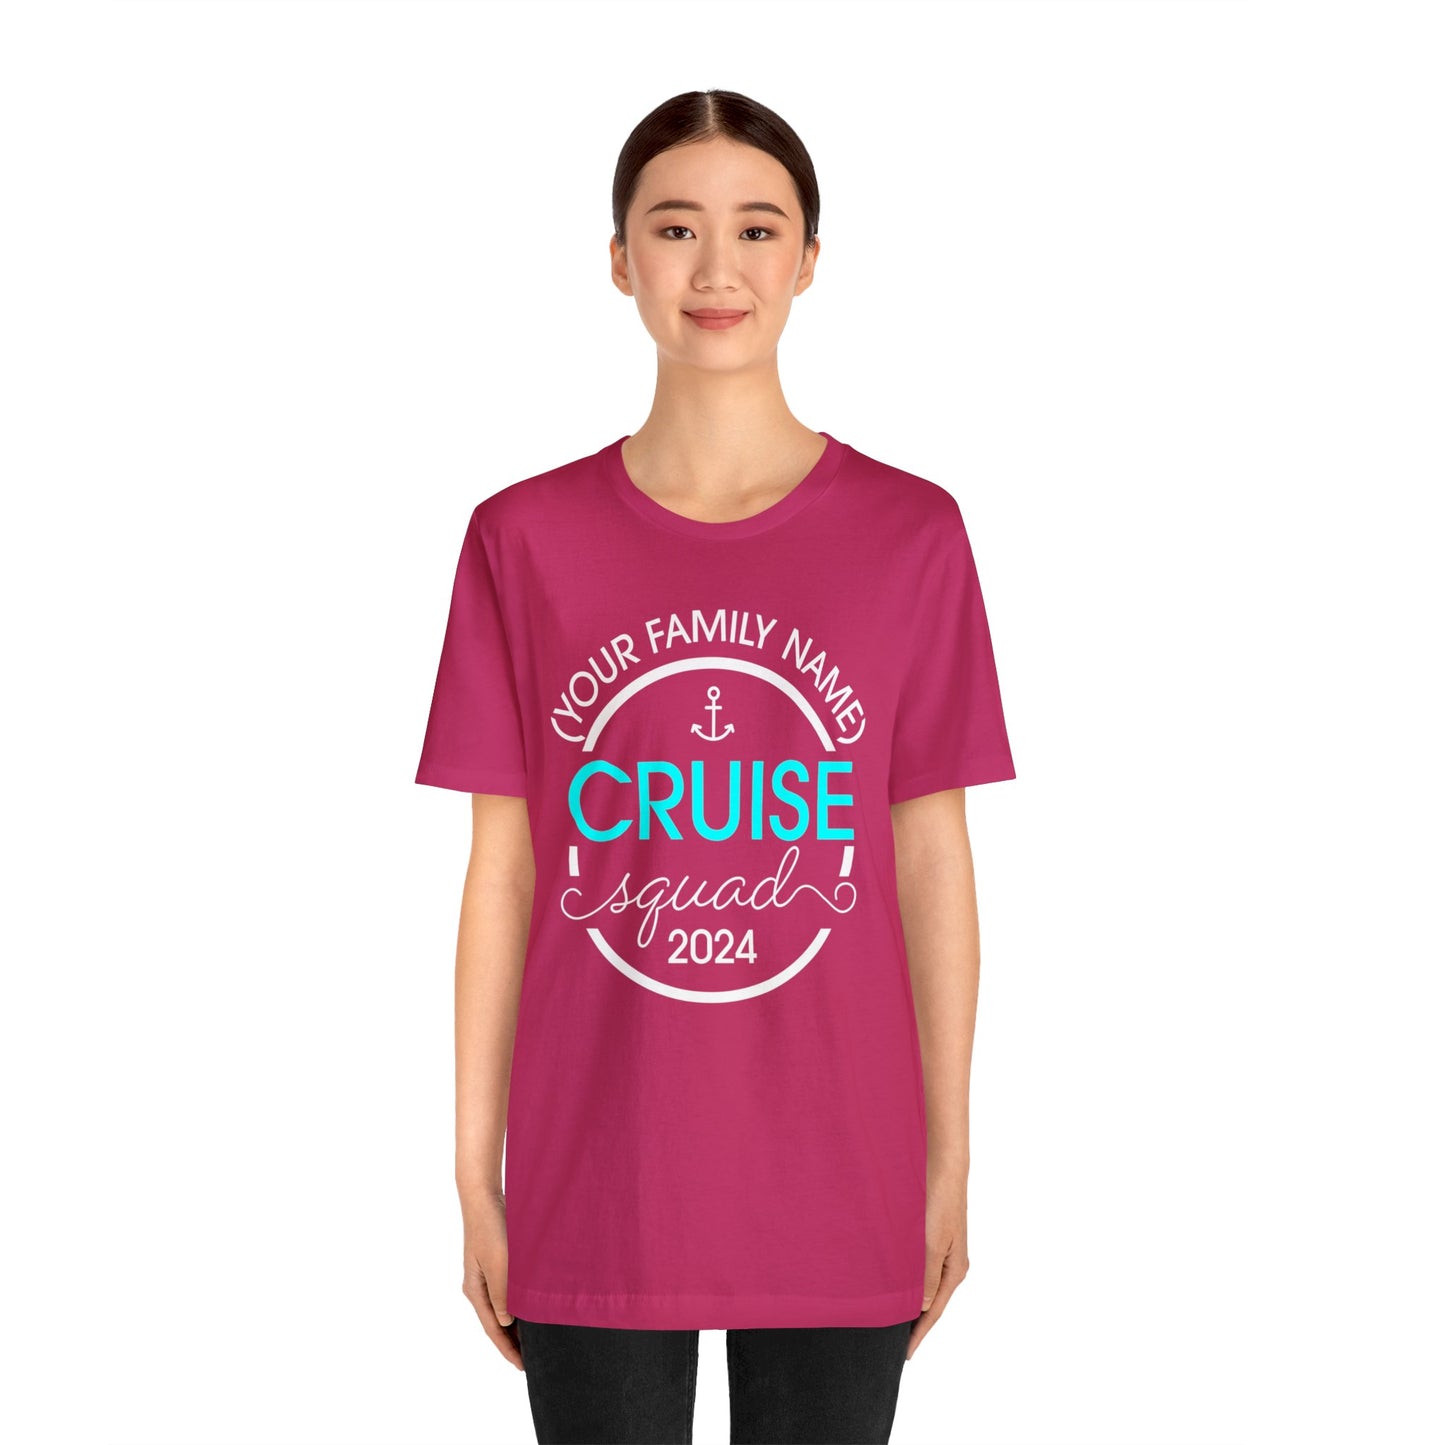 Cruise Squad 2024 (Your Family Name) Custom–Unisex Lightweight Fashion Tee–EXPRESS DELIVERY*